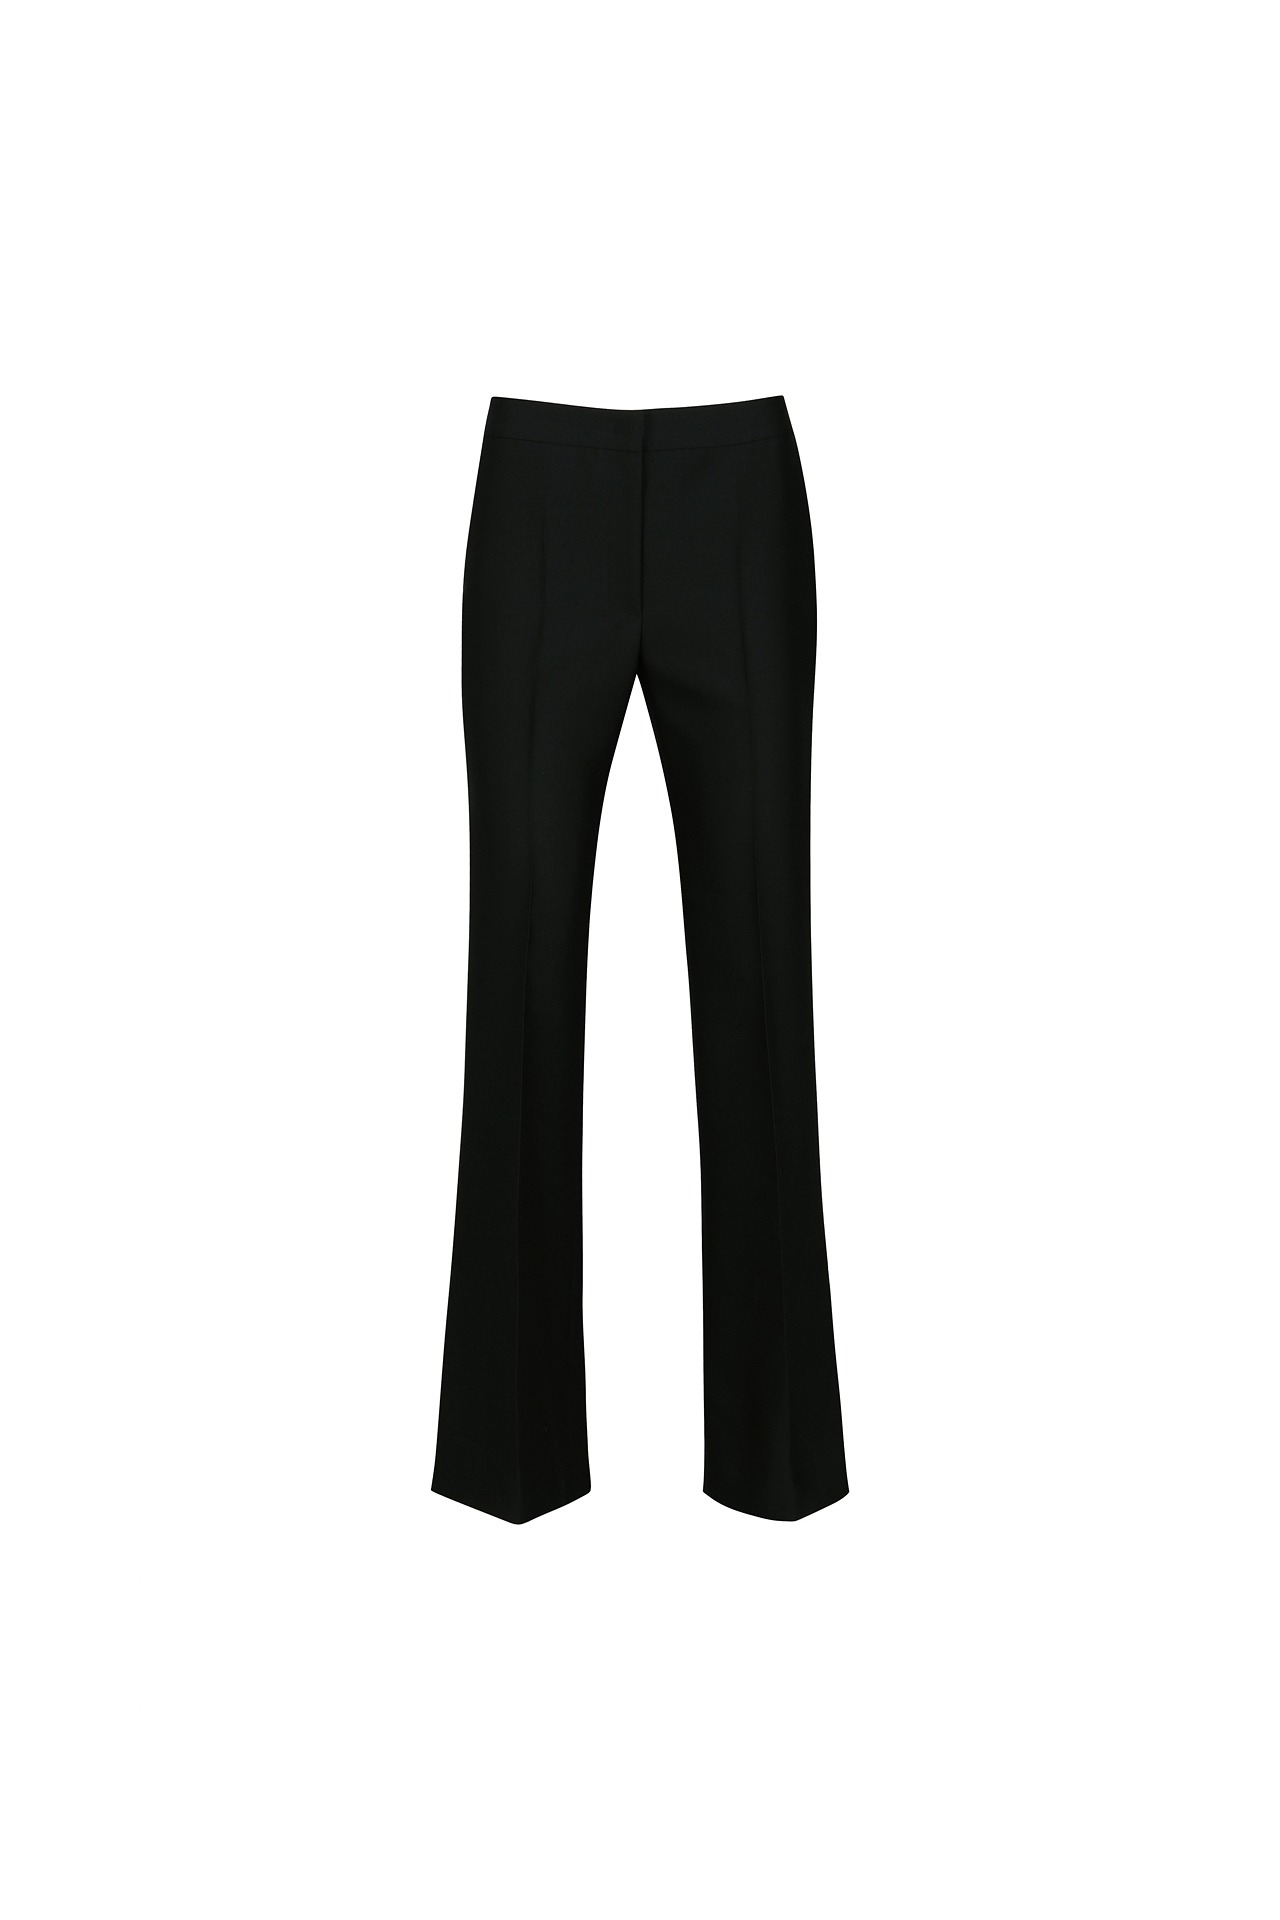 WOOL-BLEND TAILORED TROUSERS